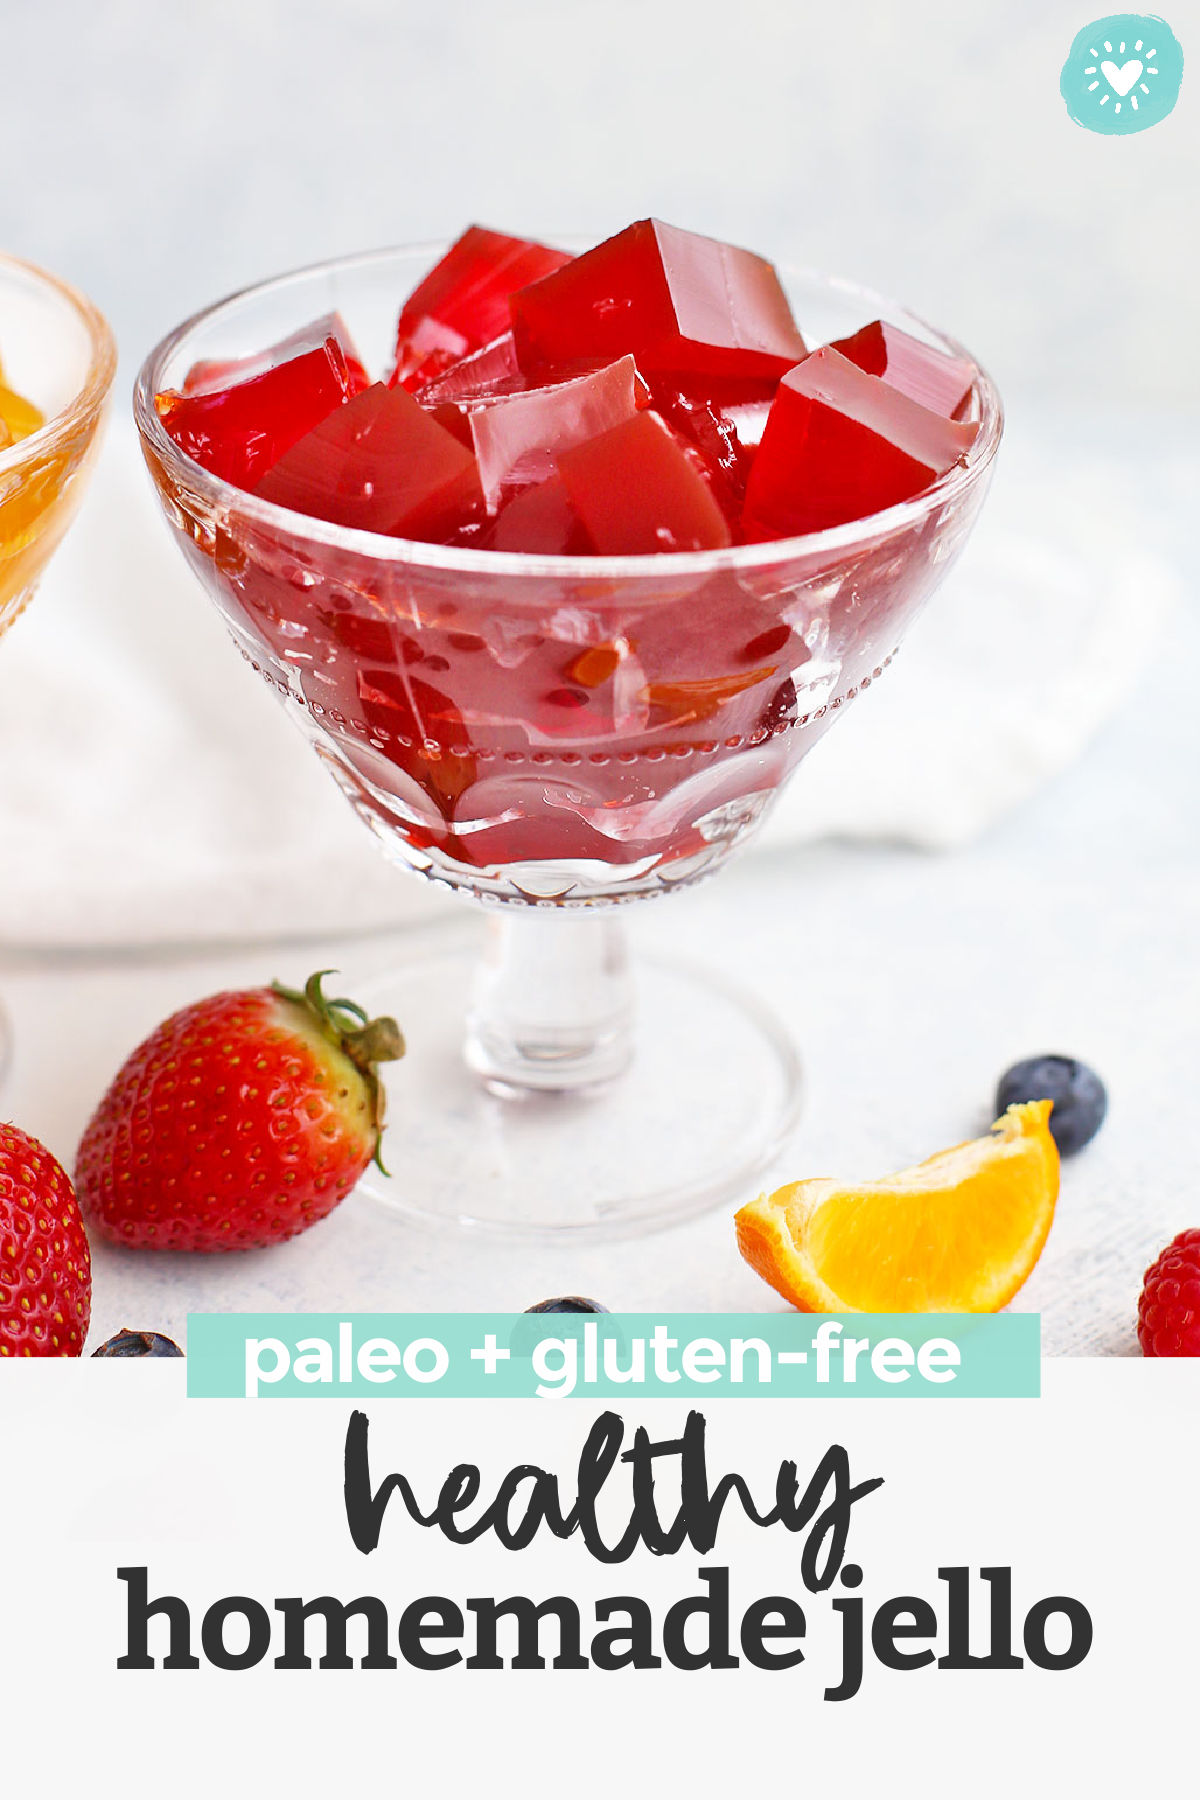 How to Make Healthy Homemade Jello • One Lovely Life